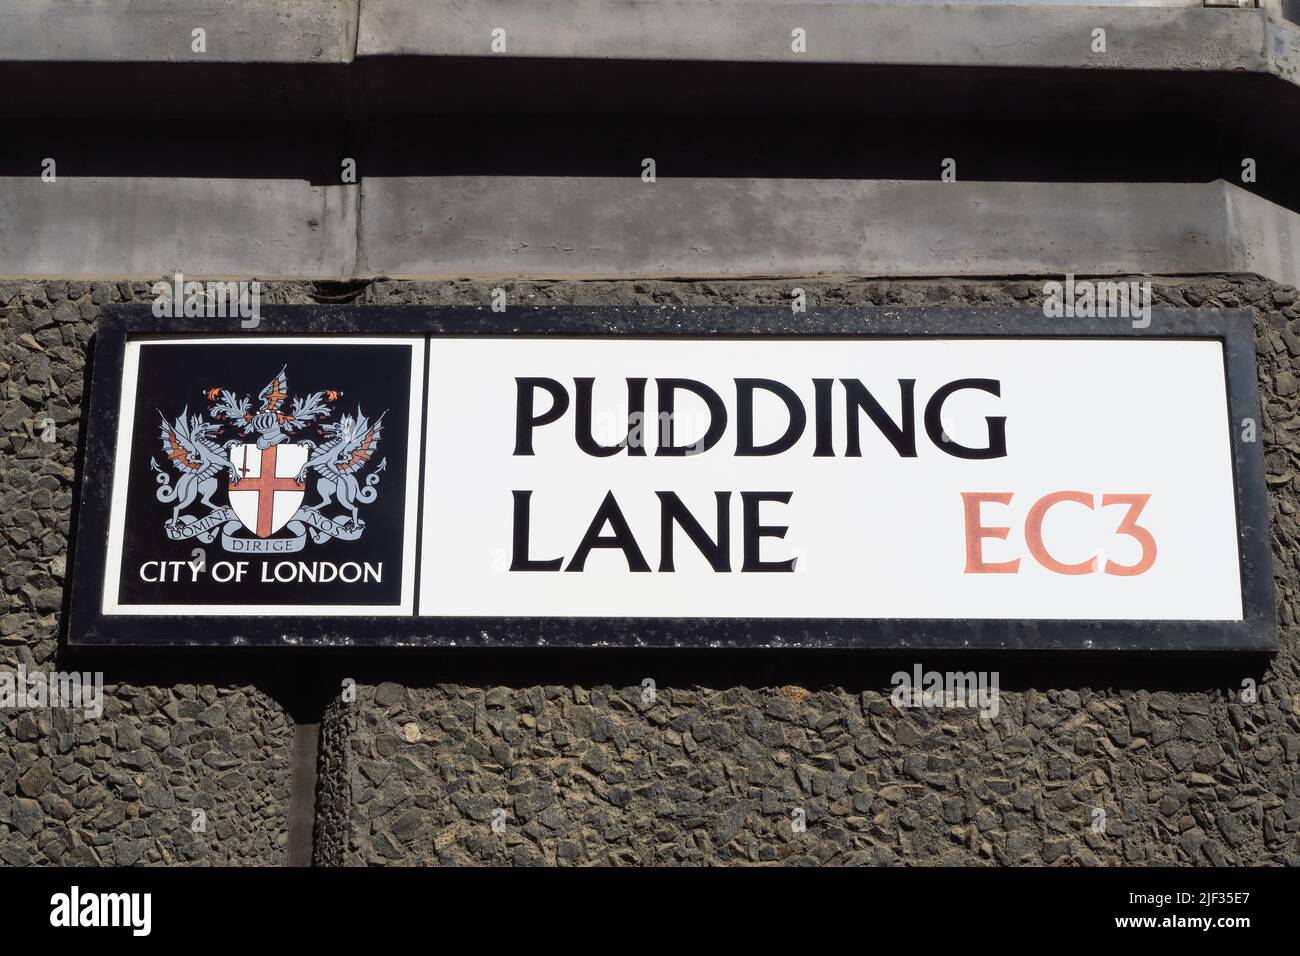 Pudding Lane sign in the City of London. It was in Thomas Farriner's bakery on this street that the Great Fire of London started in 1666. Stock Photo